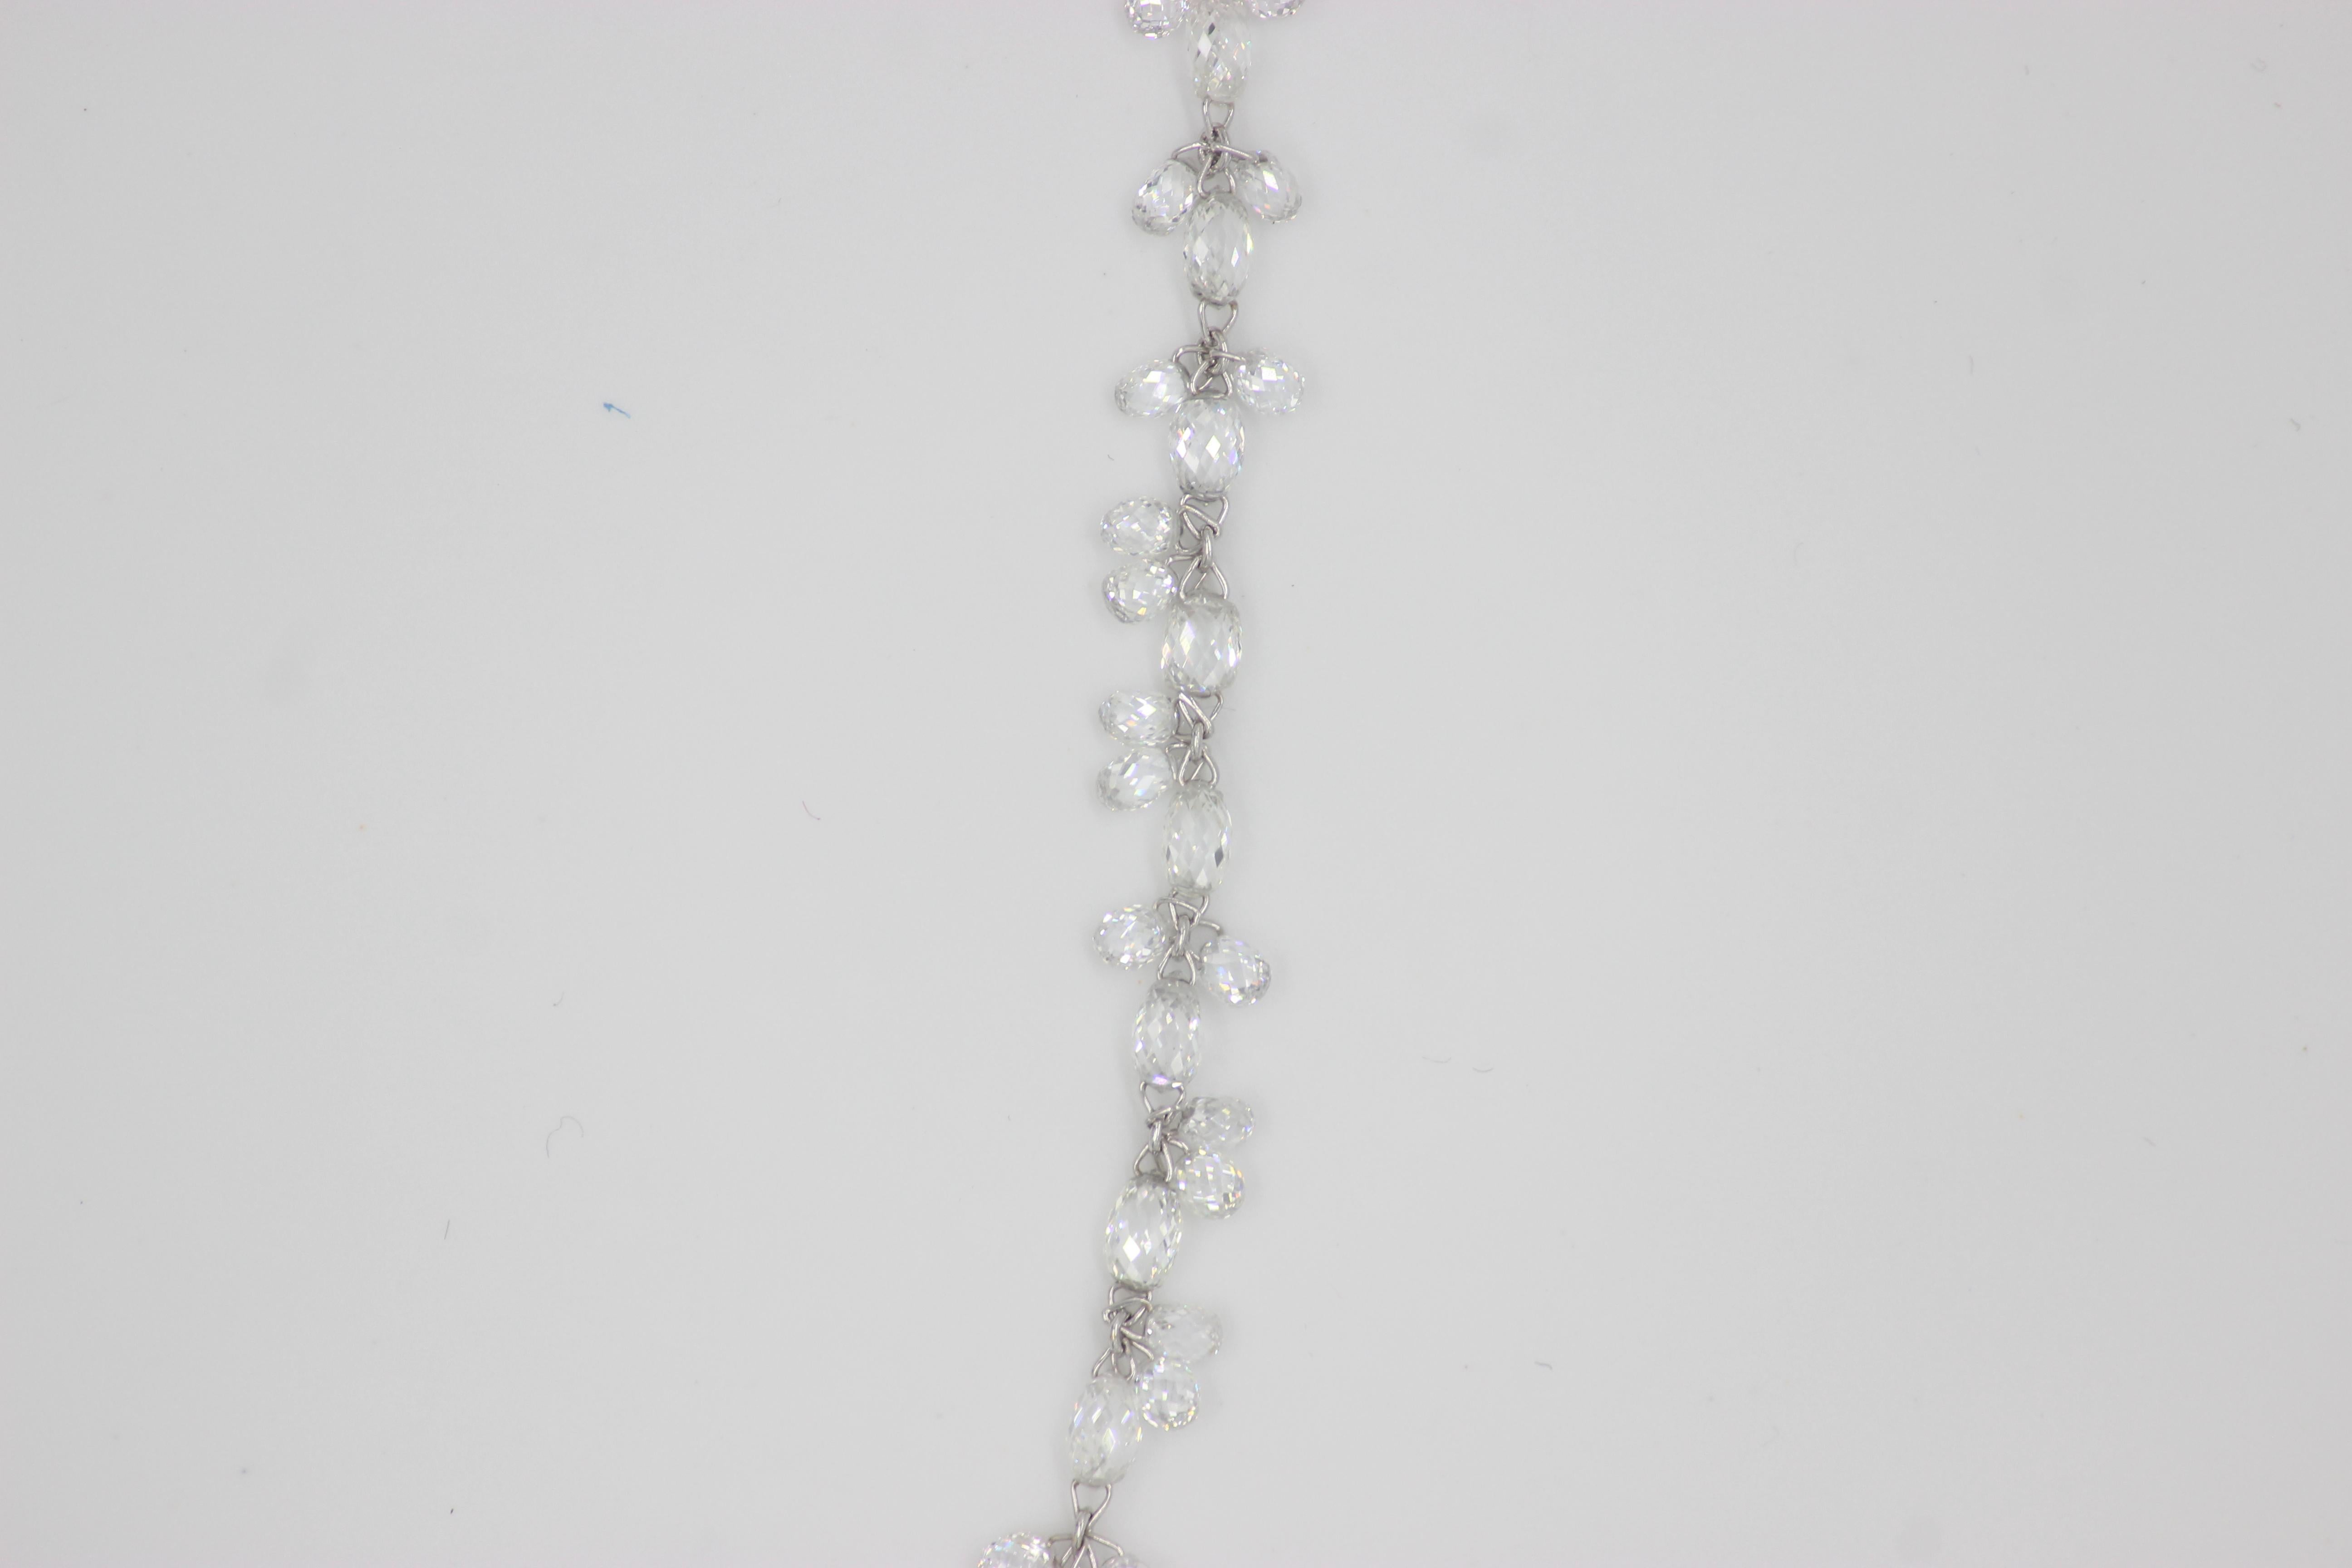 PANIM 26.45Carat Floral Briolette Necklace in White Gold Necklace

This statement necklace provides with a complete look in itself. Its Combination of two hole round Rose Cut Diamond & One Hole Dangling Pear Briolette cut diamond linked with 18